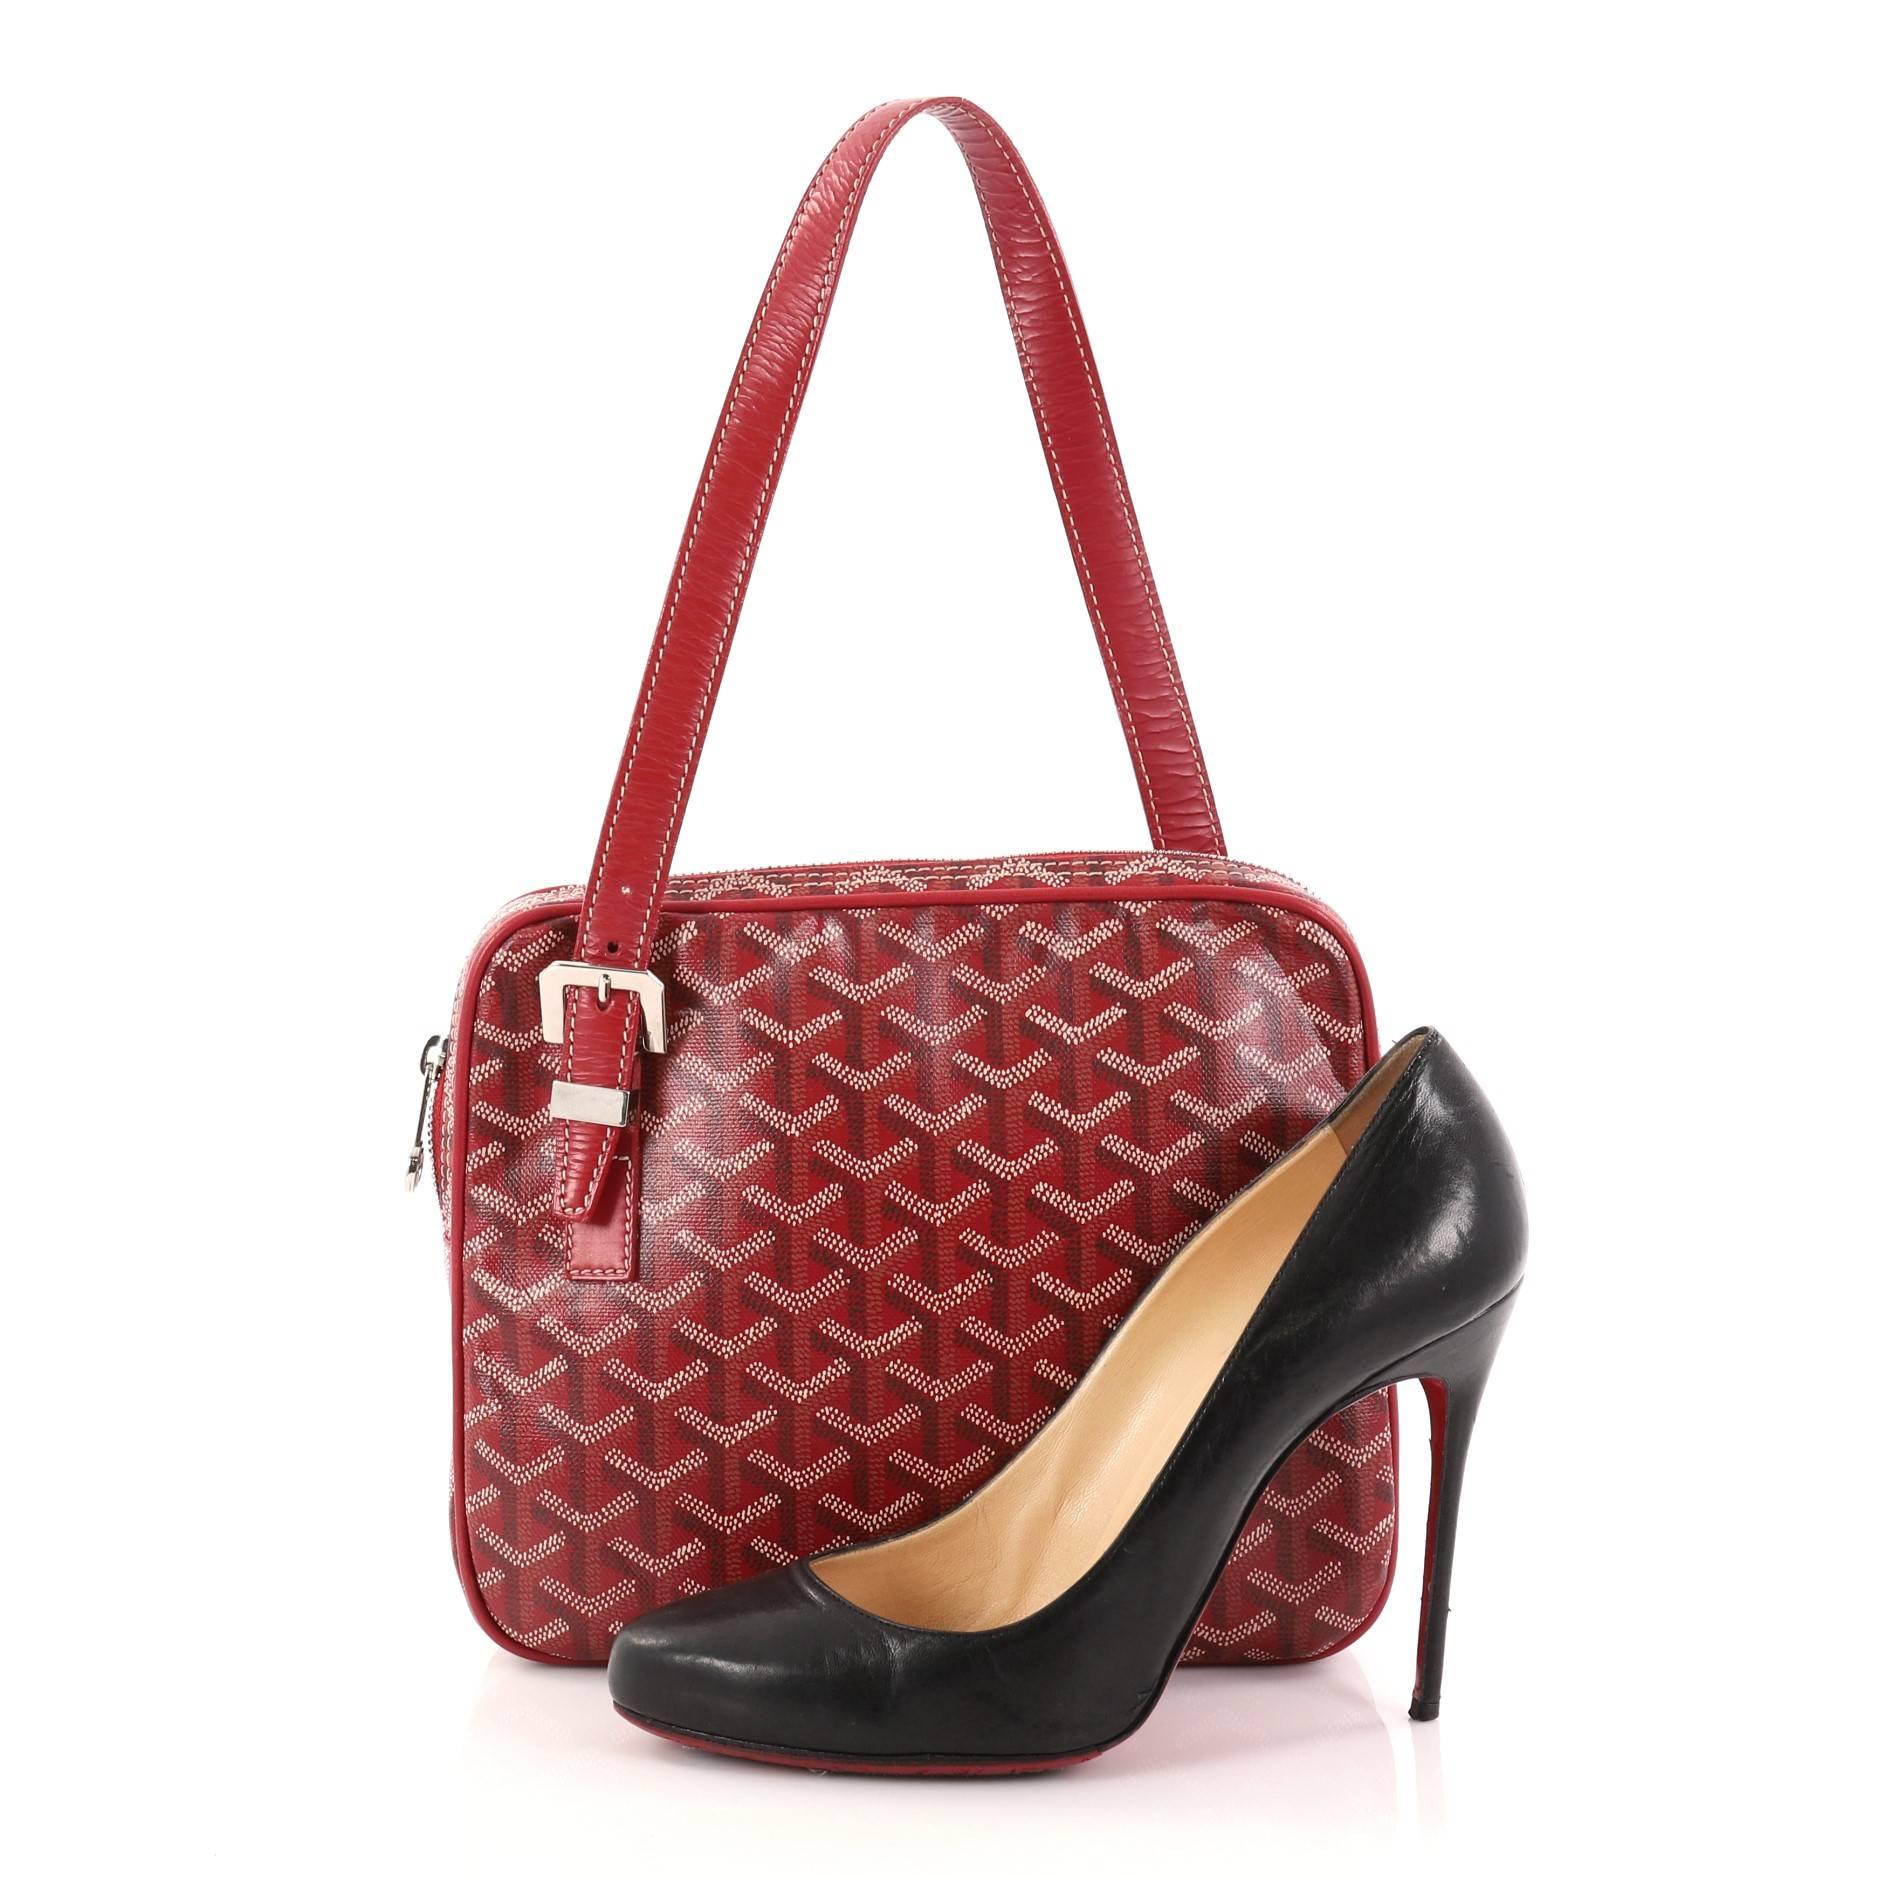 This authentic Goyard Yona Bag Coated Canvas MM is a chic and minimalist bag perfect for your daily use. Crafted in red Goyardine hand painted coated canvas, this bag features a flat shoulder strap, red leather trims, and silver-tone hardware